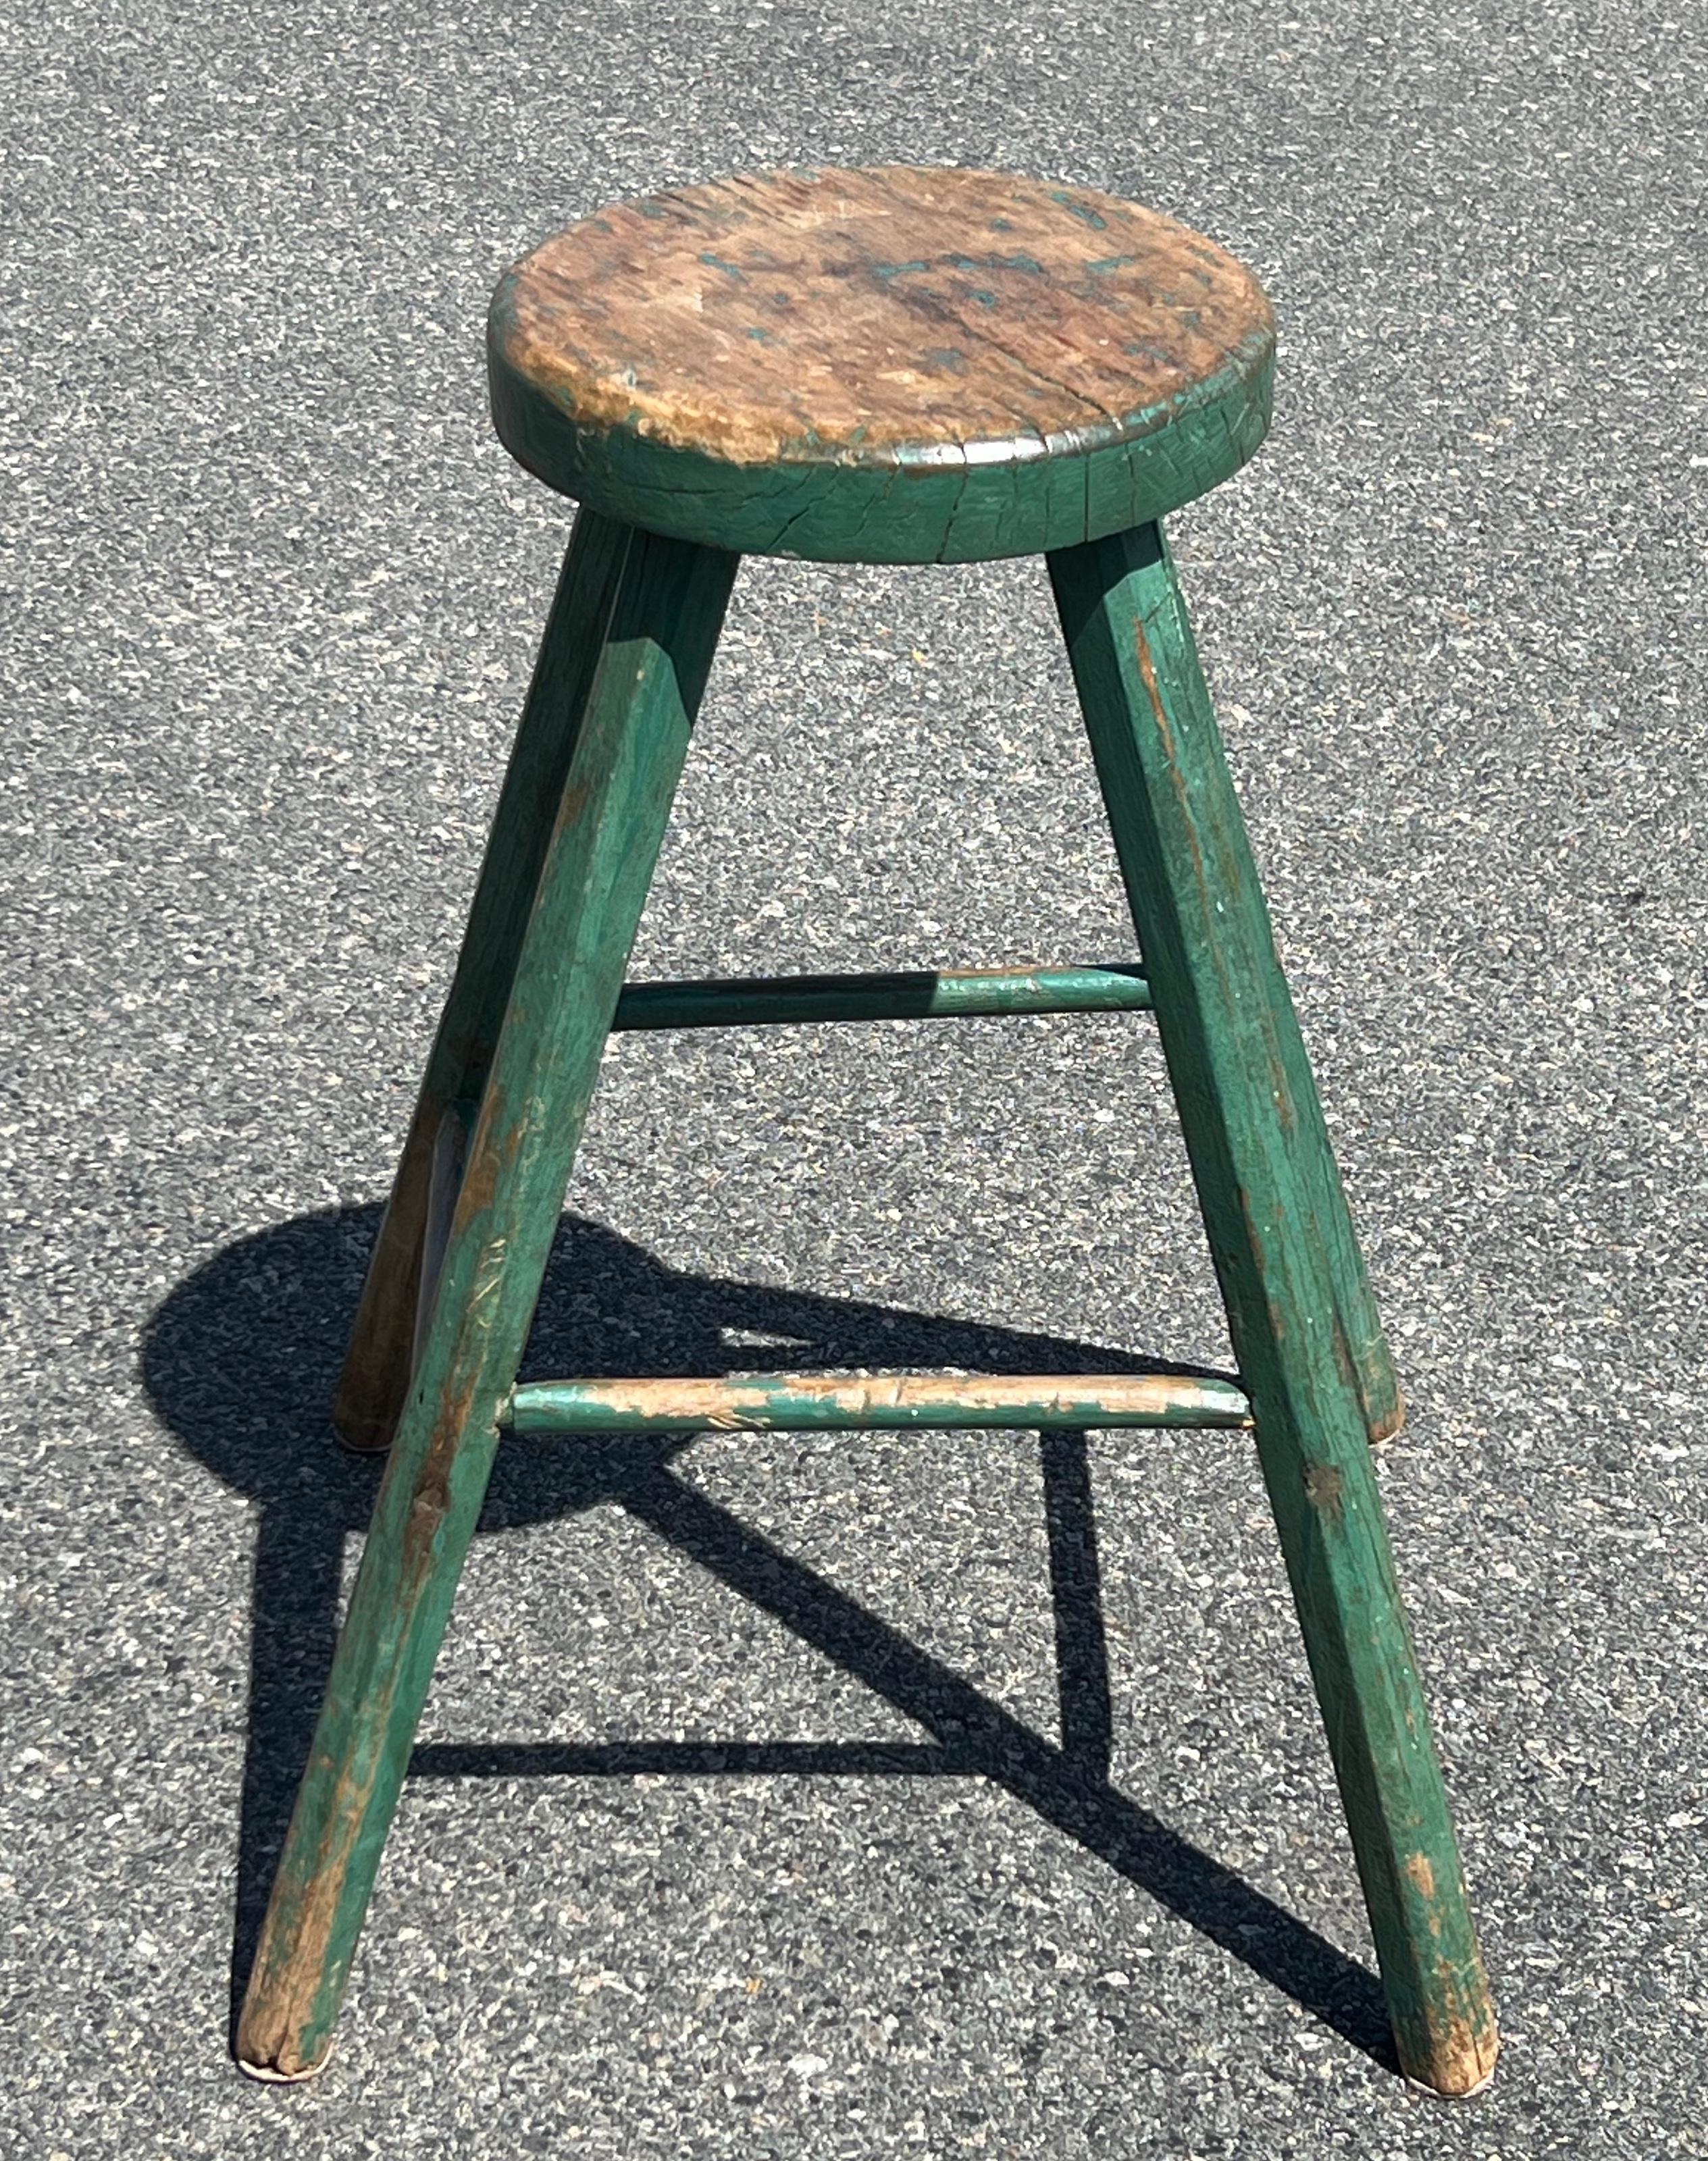 19th century stool with thick 11 inch oval seat, widely splayed legs, in original green paint.